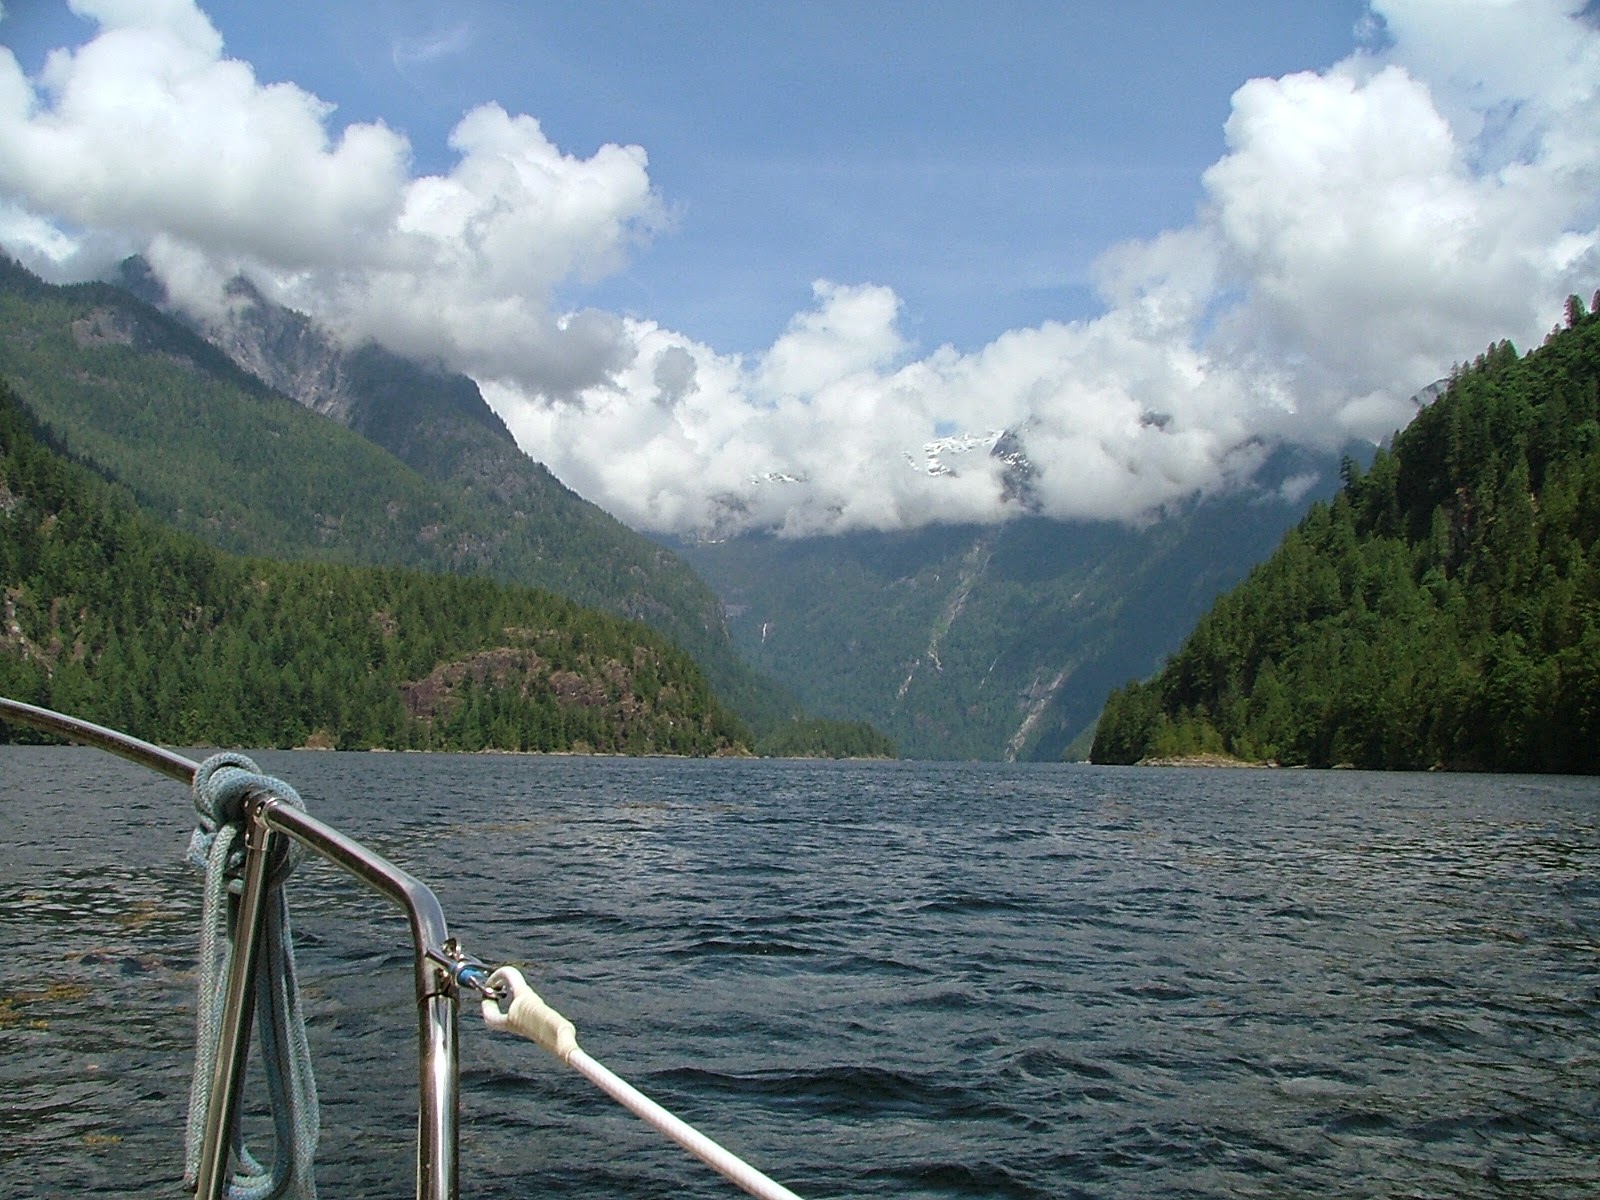 Princess Louisa Inlet where the mountains really do touch the sky